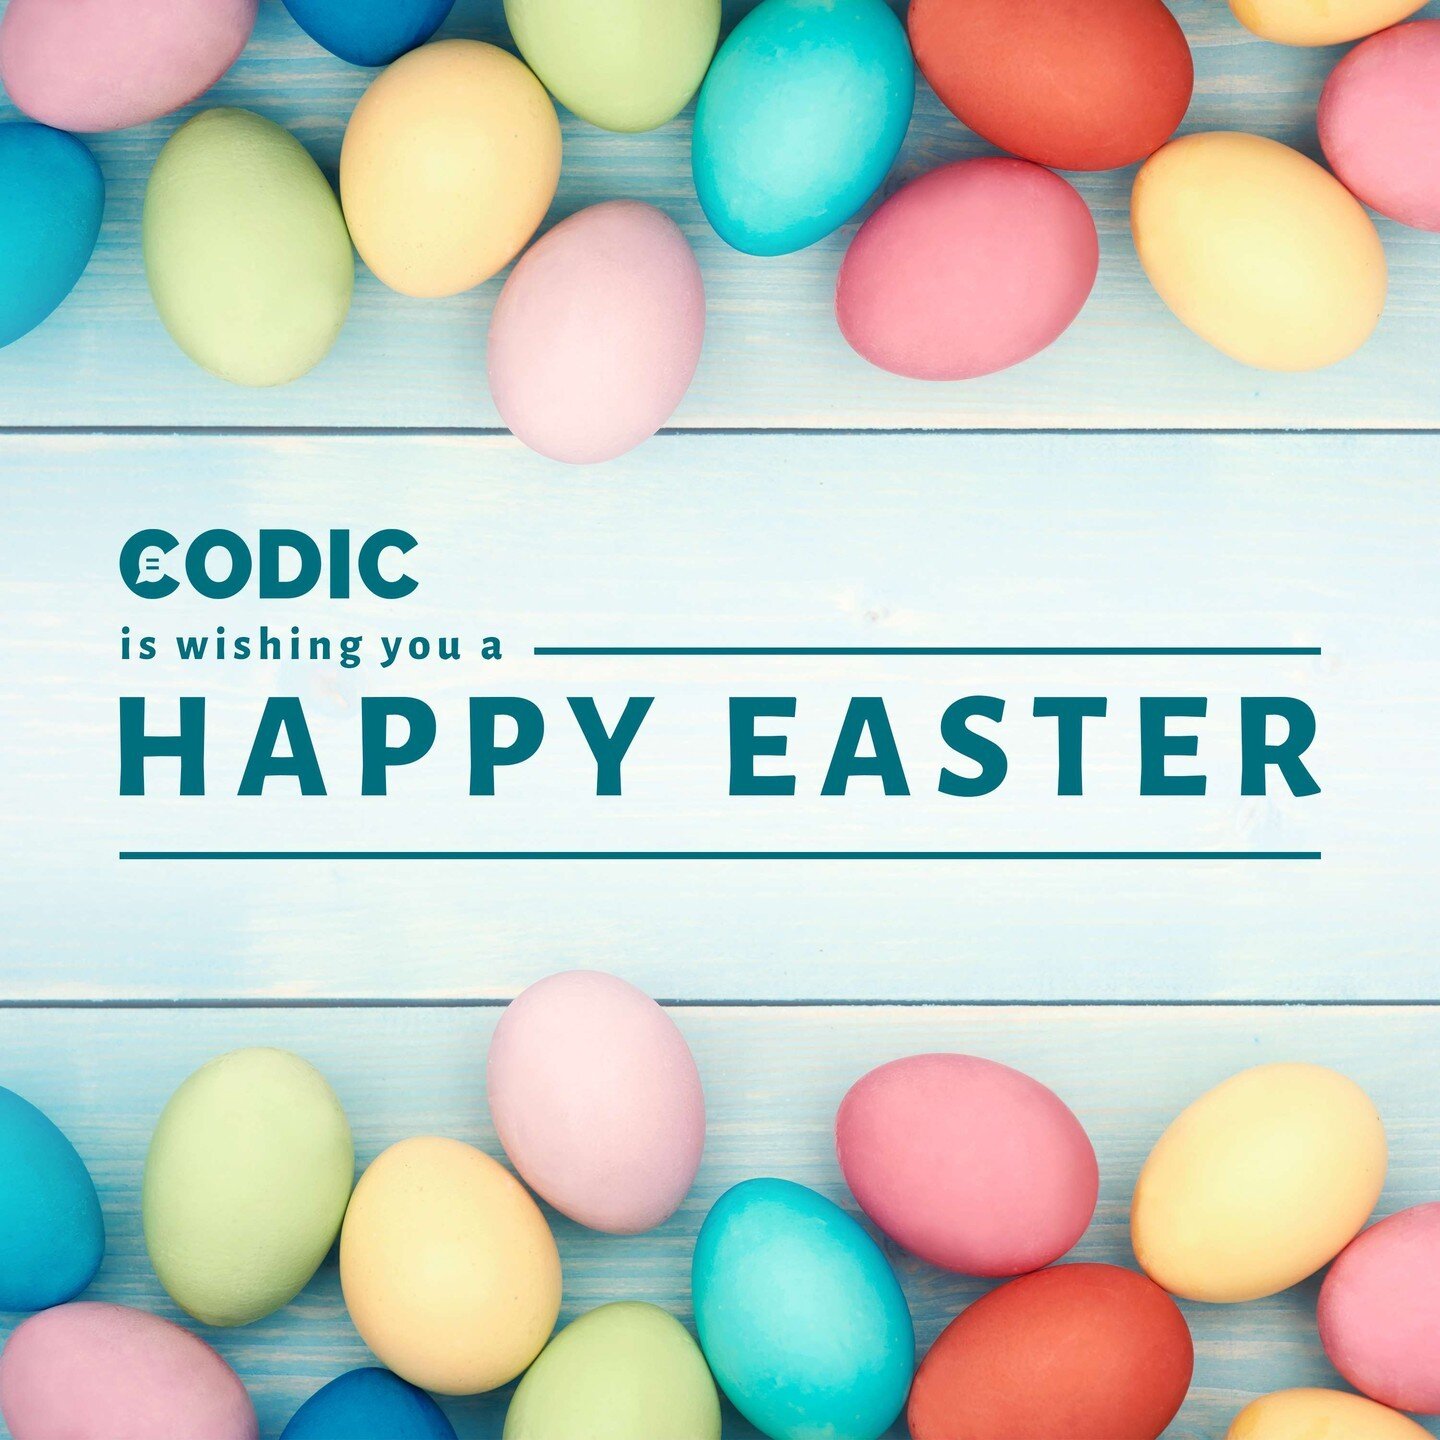 Happy Easter from all of us at Codic! May your weekend be filled with joy and lots of chocolate eggs! 🐣🎉